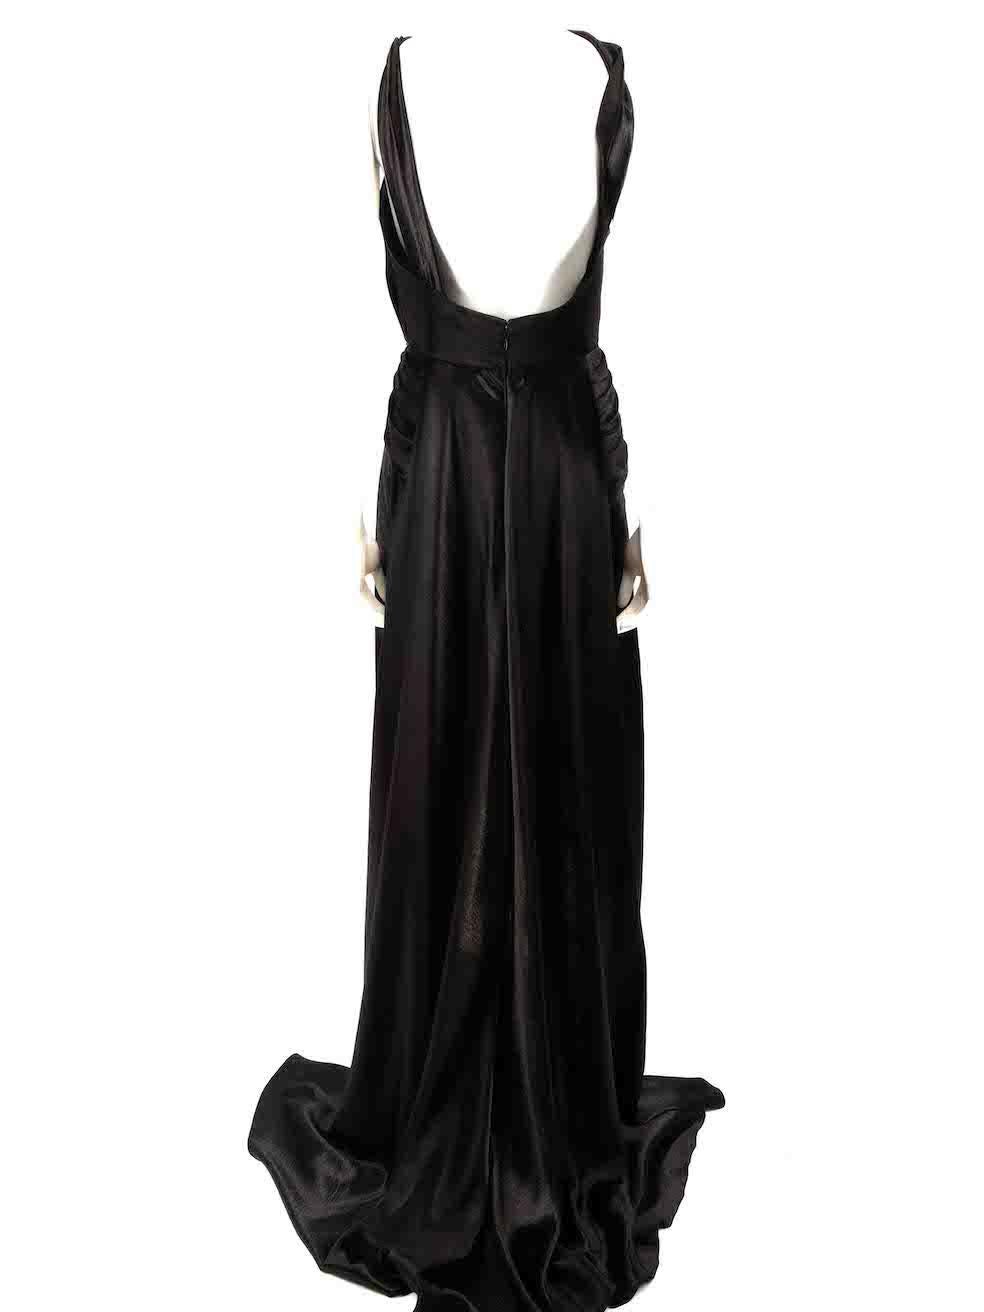 Honayda Black Sleeveless Drape Detail Gown Size M In Good Condition For Sale In London, GB